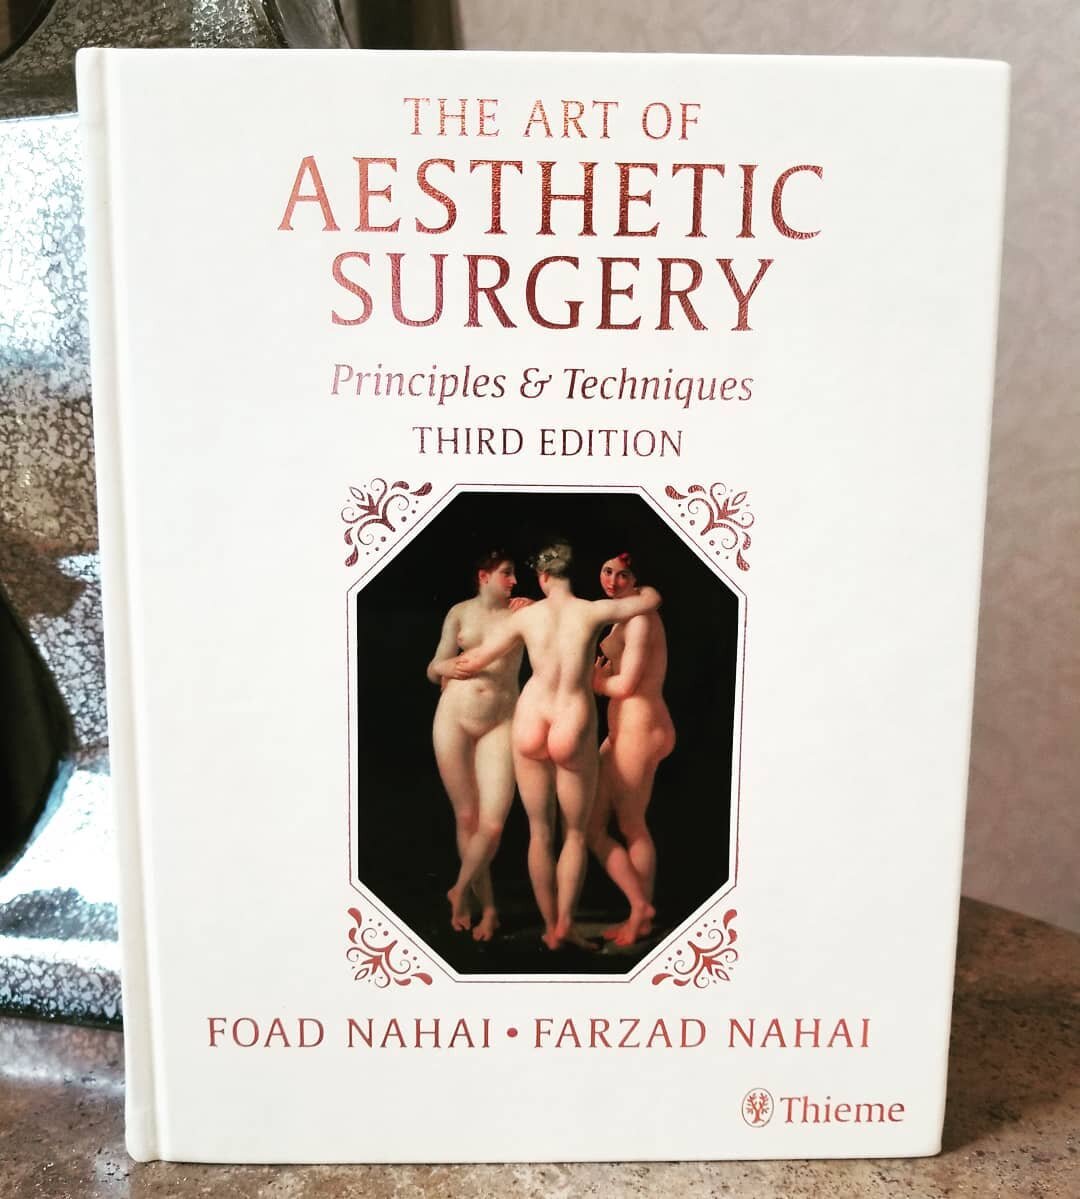 At last, the third edition of Dr. Nahai's The Art of Aesthetic Surgery has been published and the best part is that it was in collaboration with his son, Dr. Farzad Nahai.